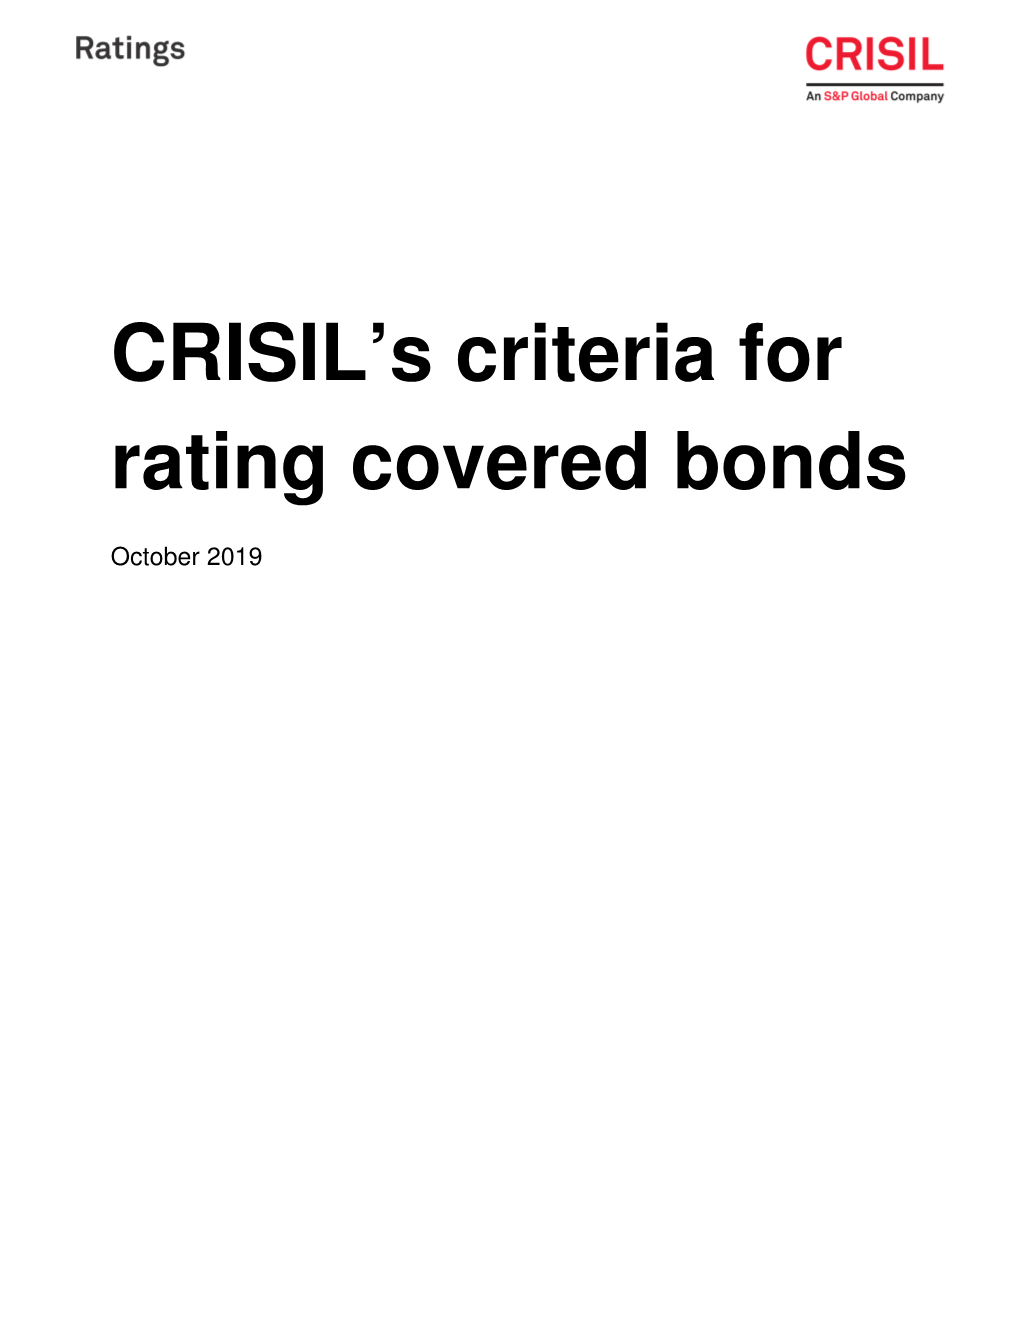 CRISIL's Criteria for Rating Covered Bonds